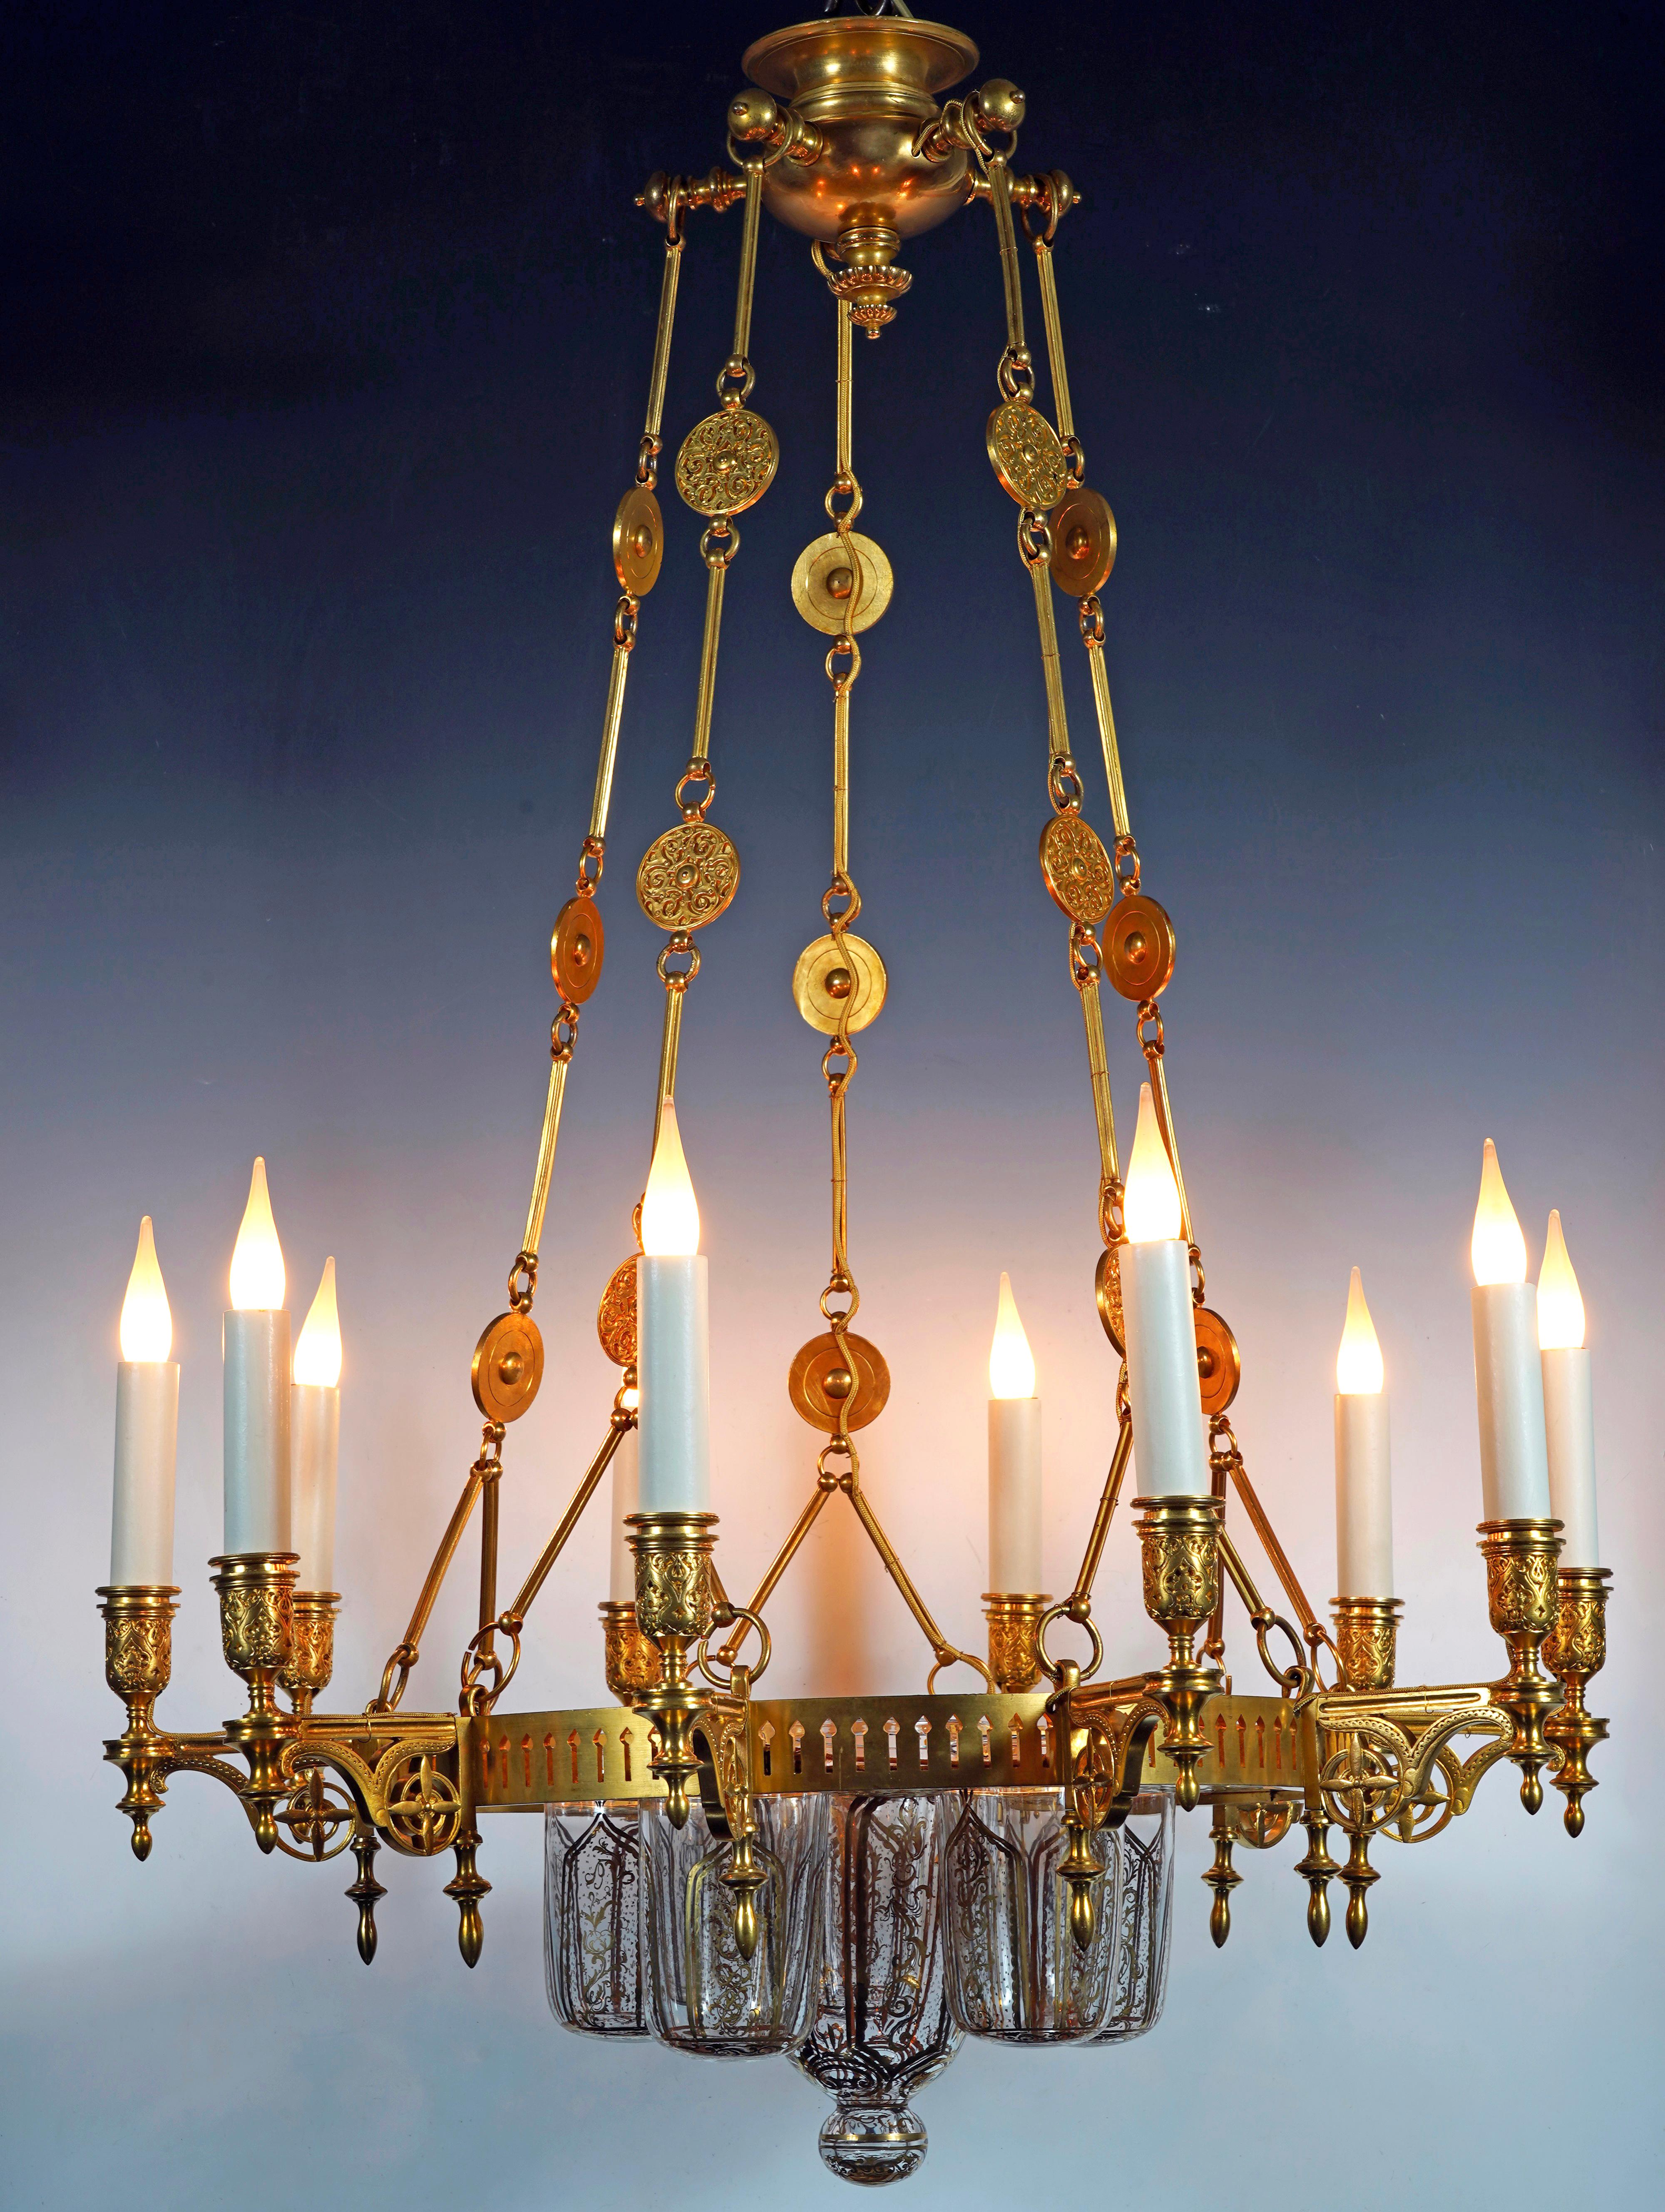 Signed F. Barbedienne

Rare Ottoman style gilded bronze chandelier composed of an openwork crown, from which ten arms of light emerge, holding six transparent glasses decorated with golden interlacing. The whole is attached to the ceiling light by